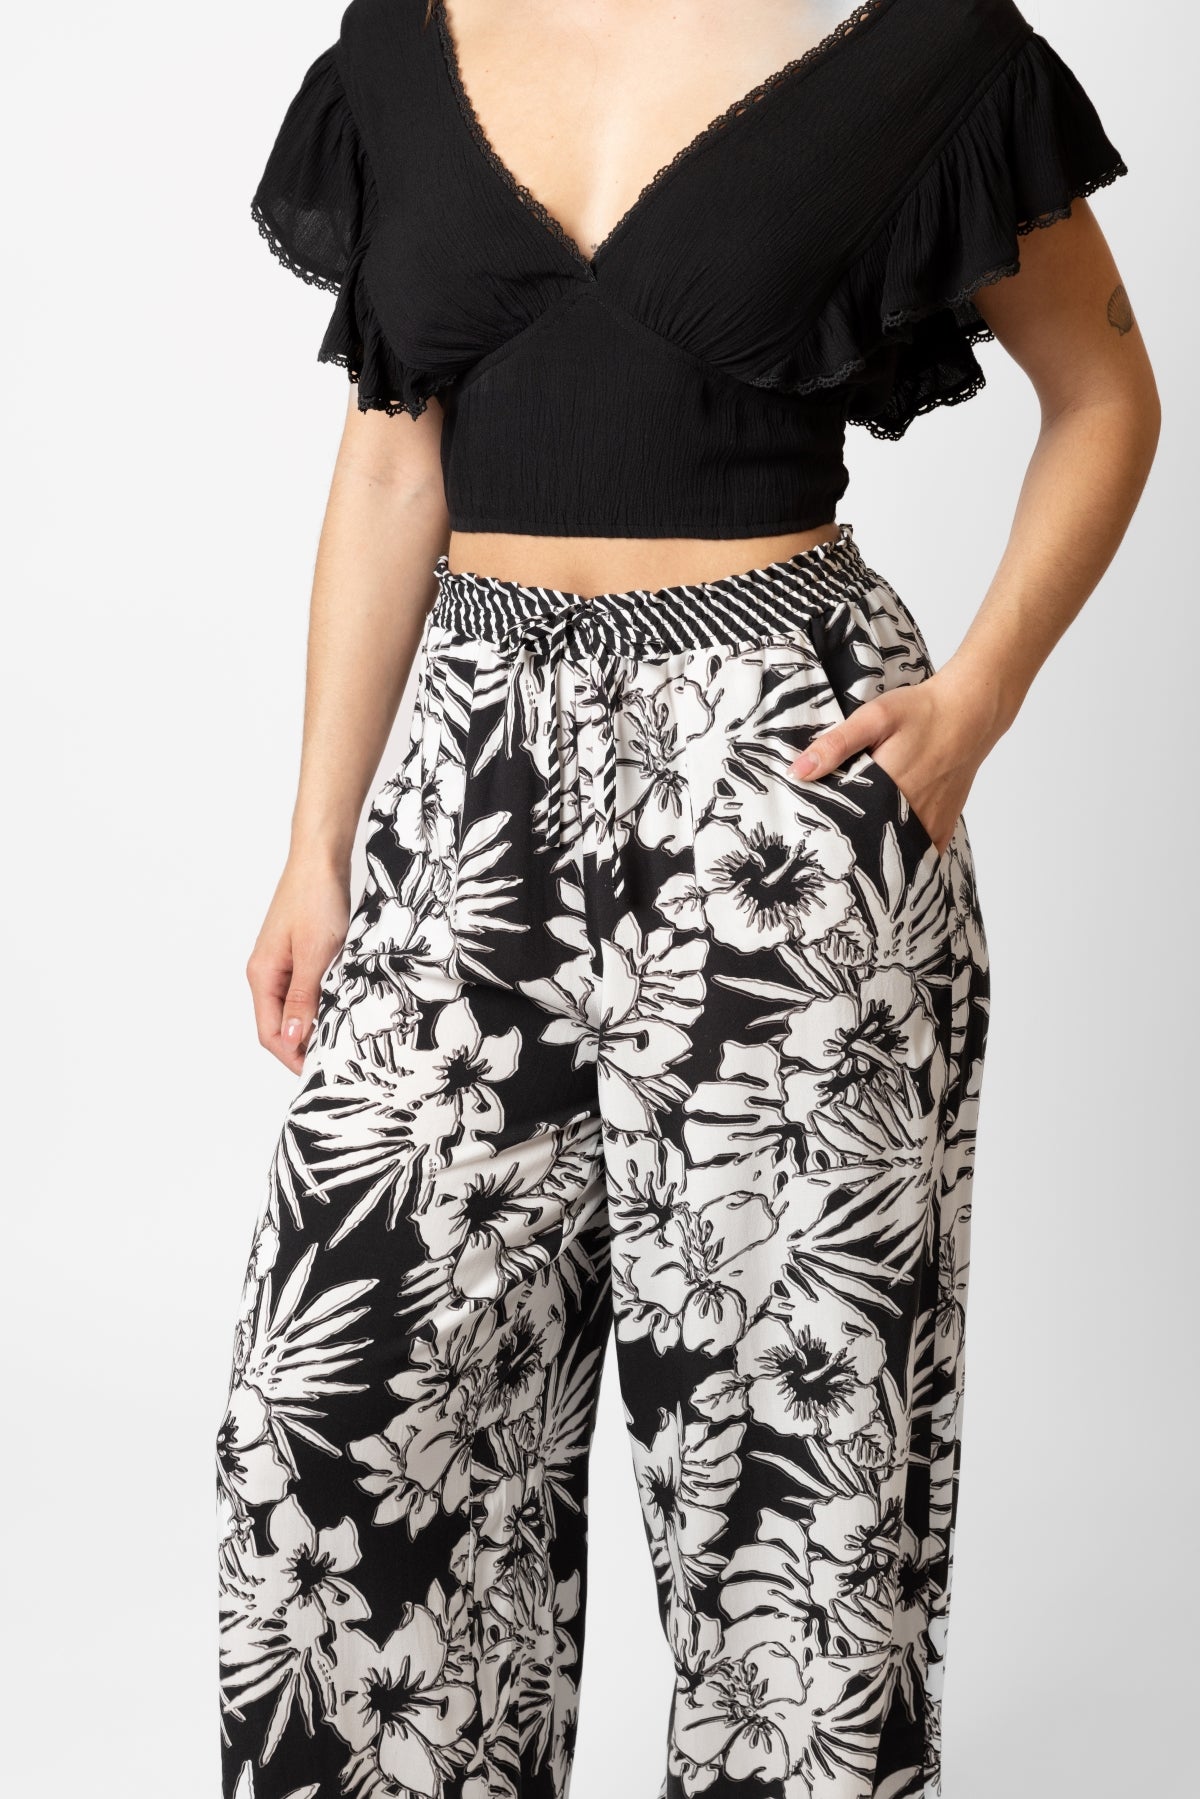 Brunette model facing front close up, wearing Black Onyx Copacabana Floral Wide Leg Pant. Features a vibrant hibiscus floral print, wide leg palazzo style, and an adjustable cinched waist with pockets. Crafted from 100% sand-washed rayon, perfect for a garden-chic look or vacation style. Koy Resort affordable vacation, cruise, and resort-wear.